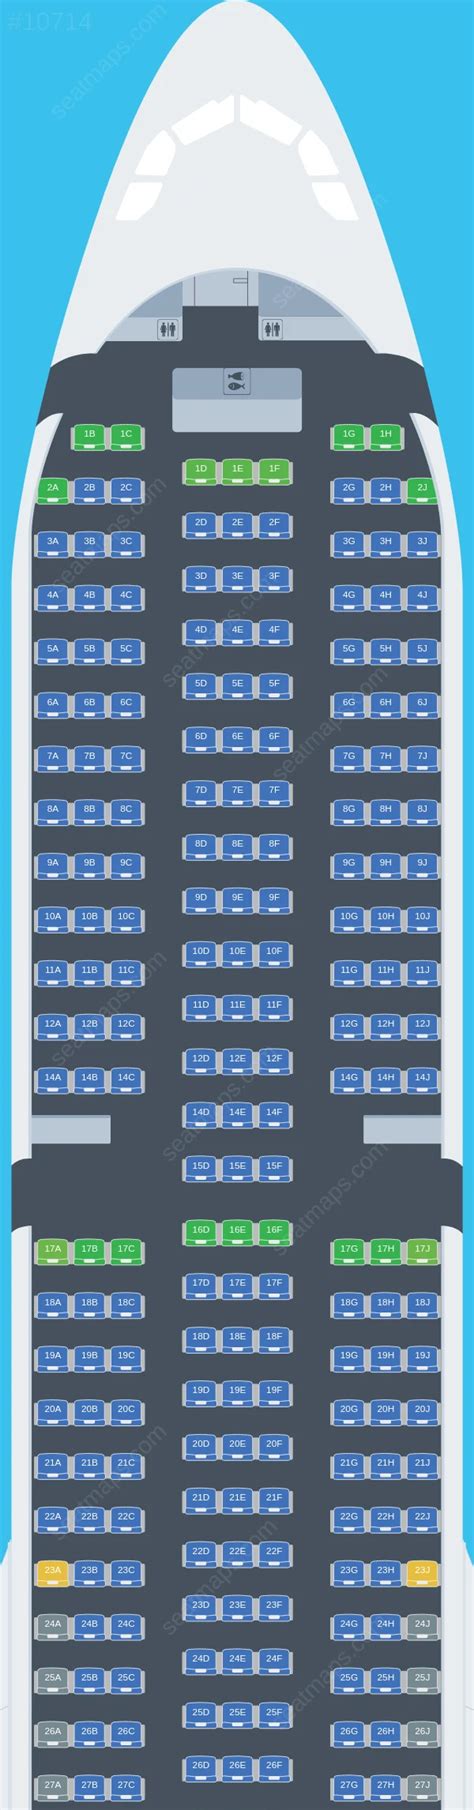 Seat Map Ratings Of Cebu Pacific Air Airbus A330 900neo